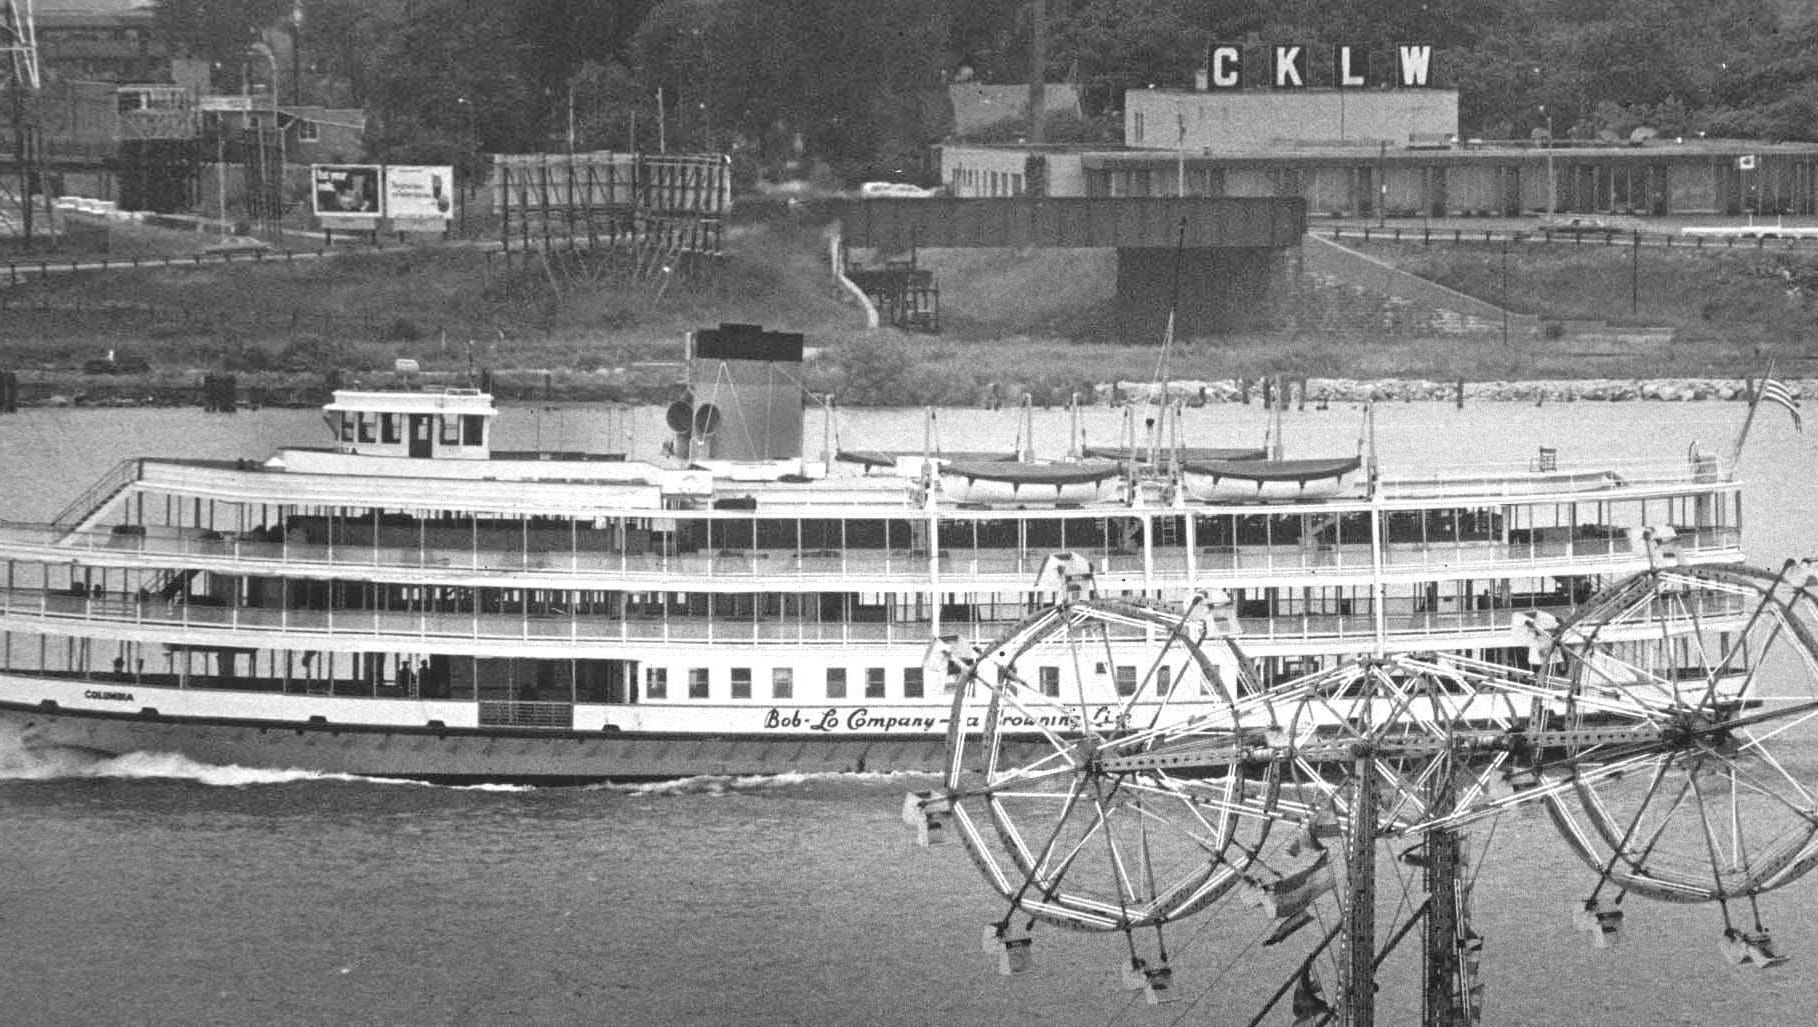 A Boblo boat passes between CKLW, the Canadian pop rock AM powerhouse station of the 1960s, and a double ferris wheel on the island.